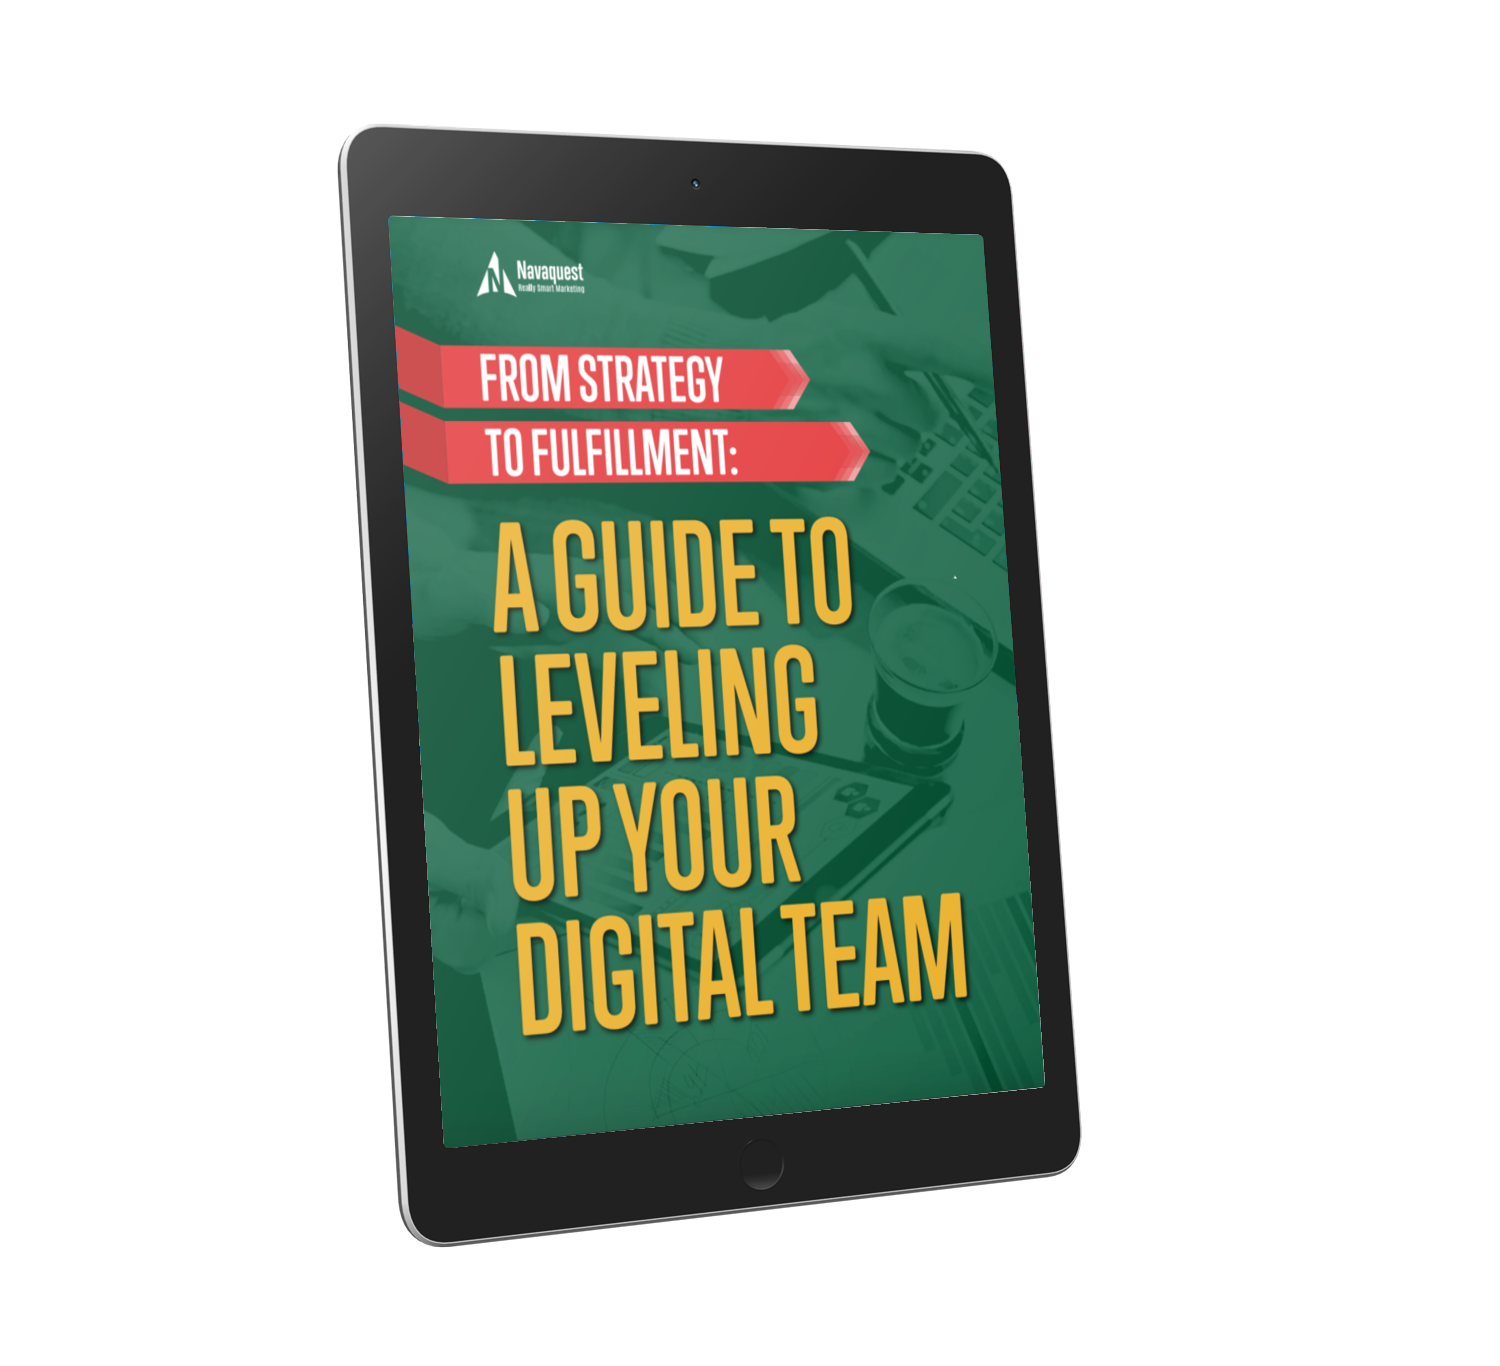 From Strategy to Fulfillment: A Guide to Leveling Up Your Digital Team